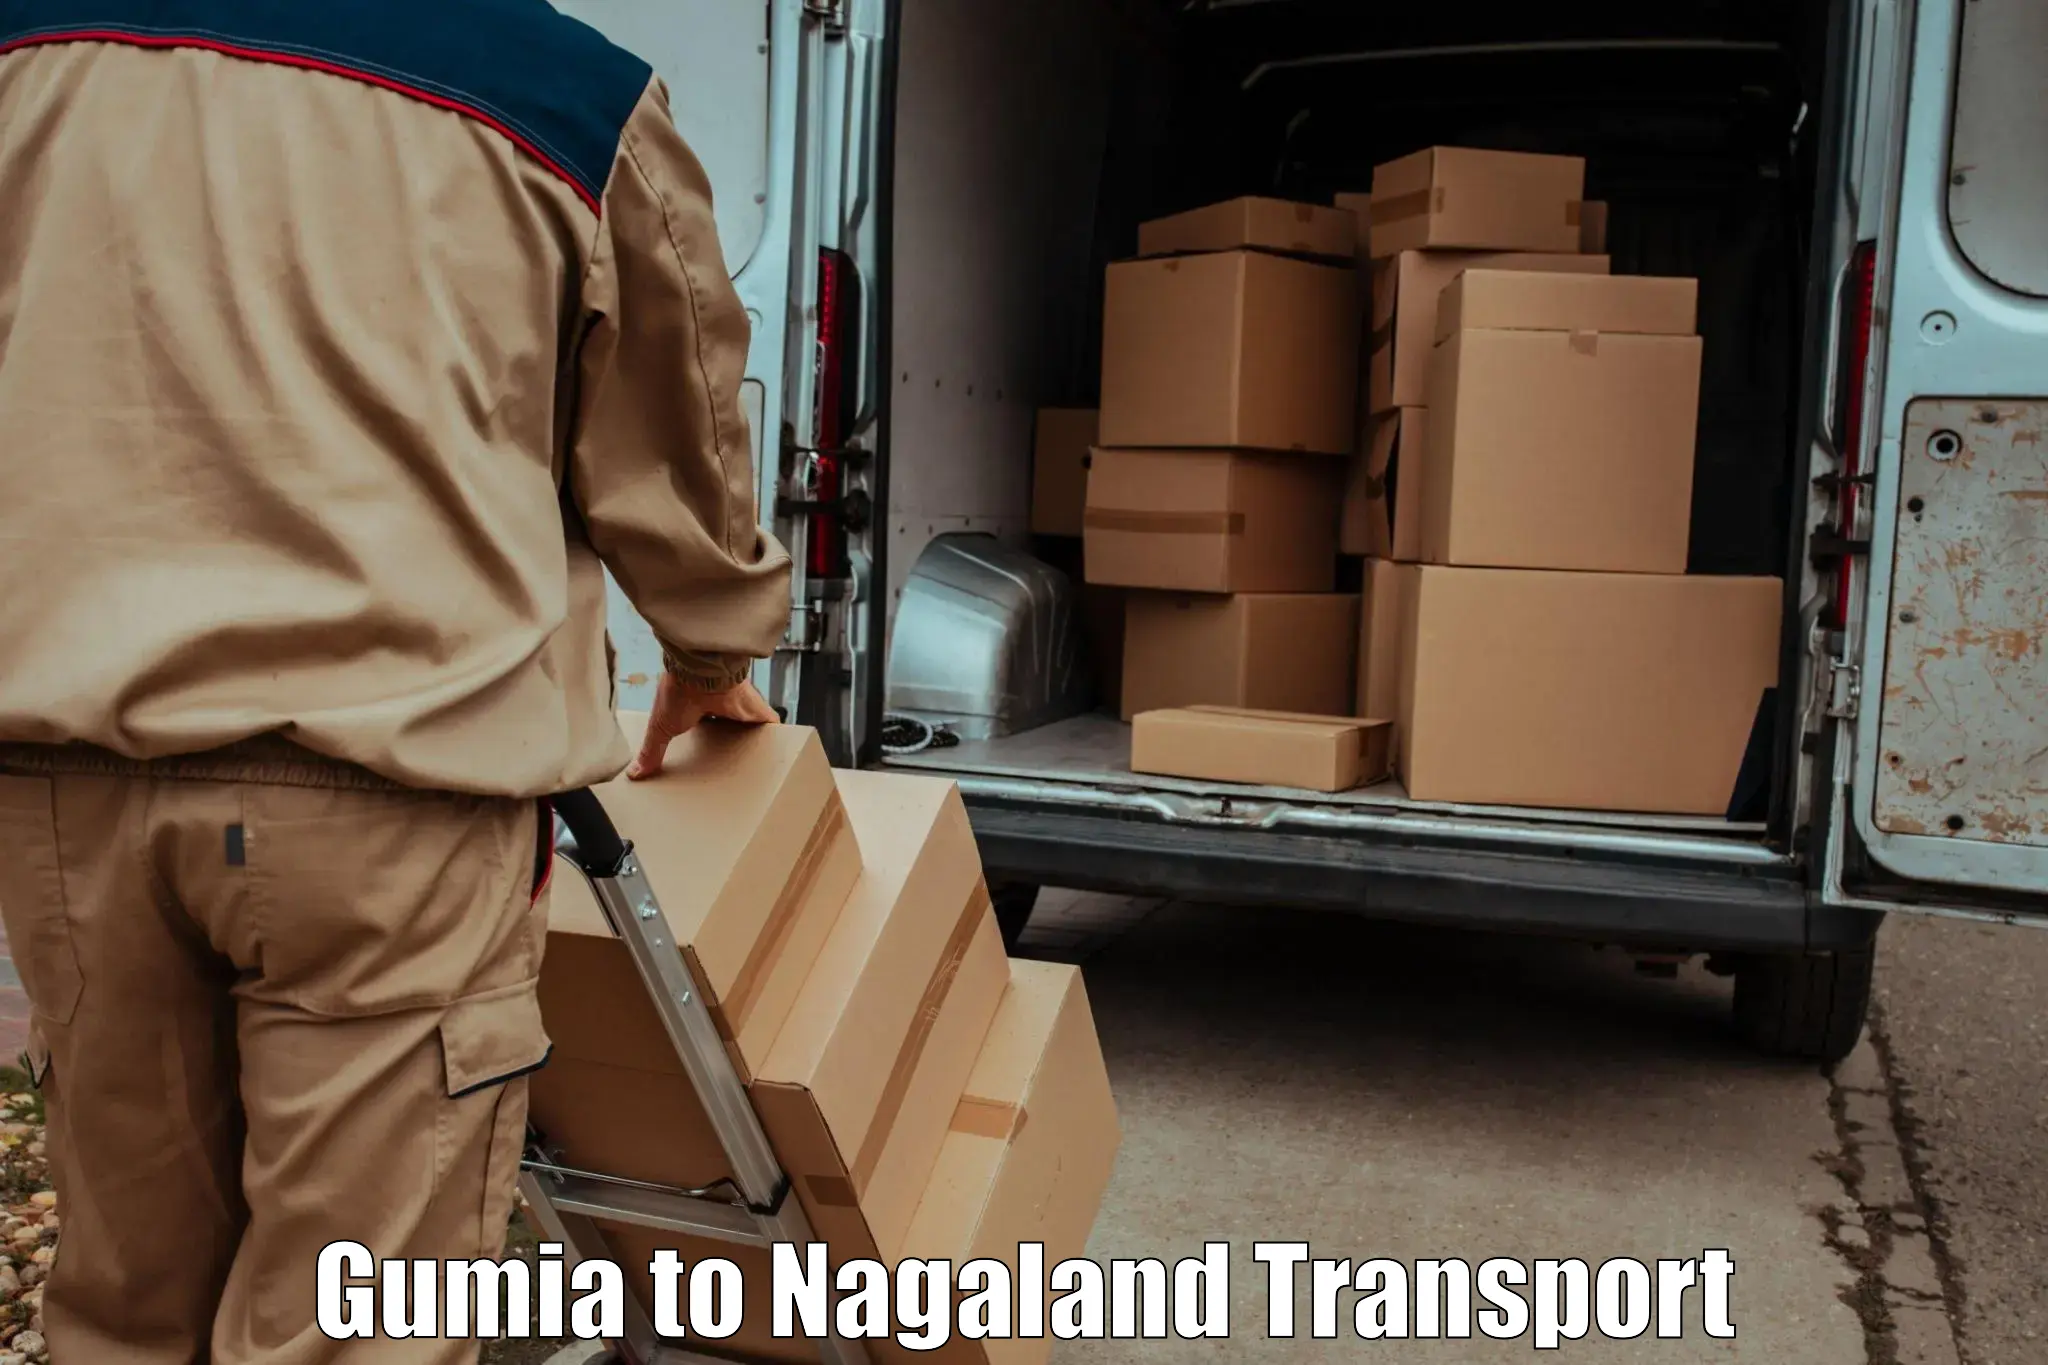 Truck transport companies in India Gumia to Nagaland